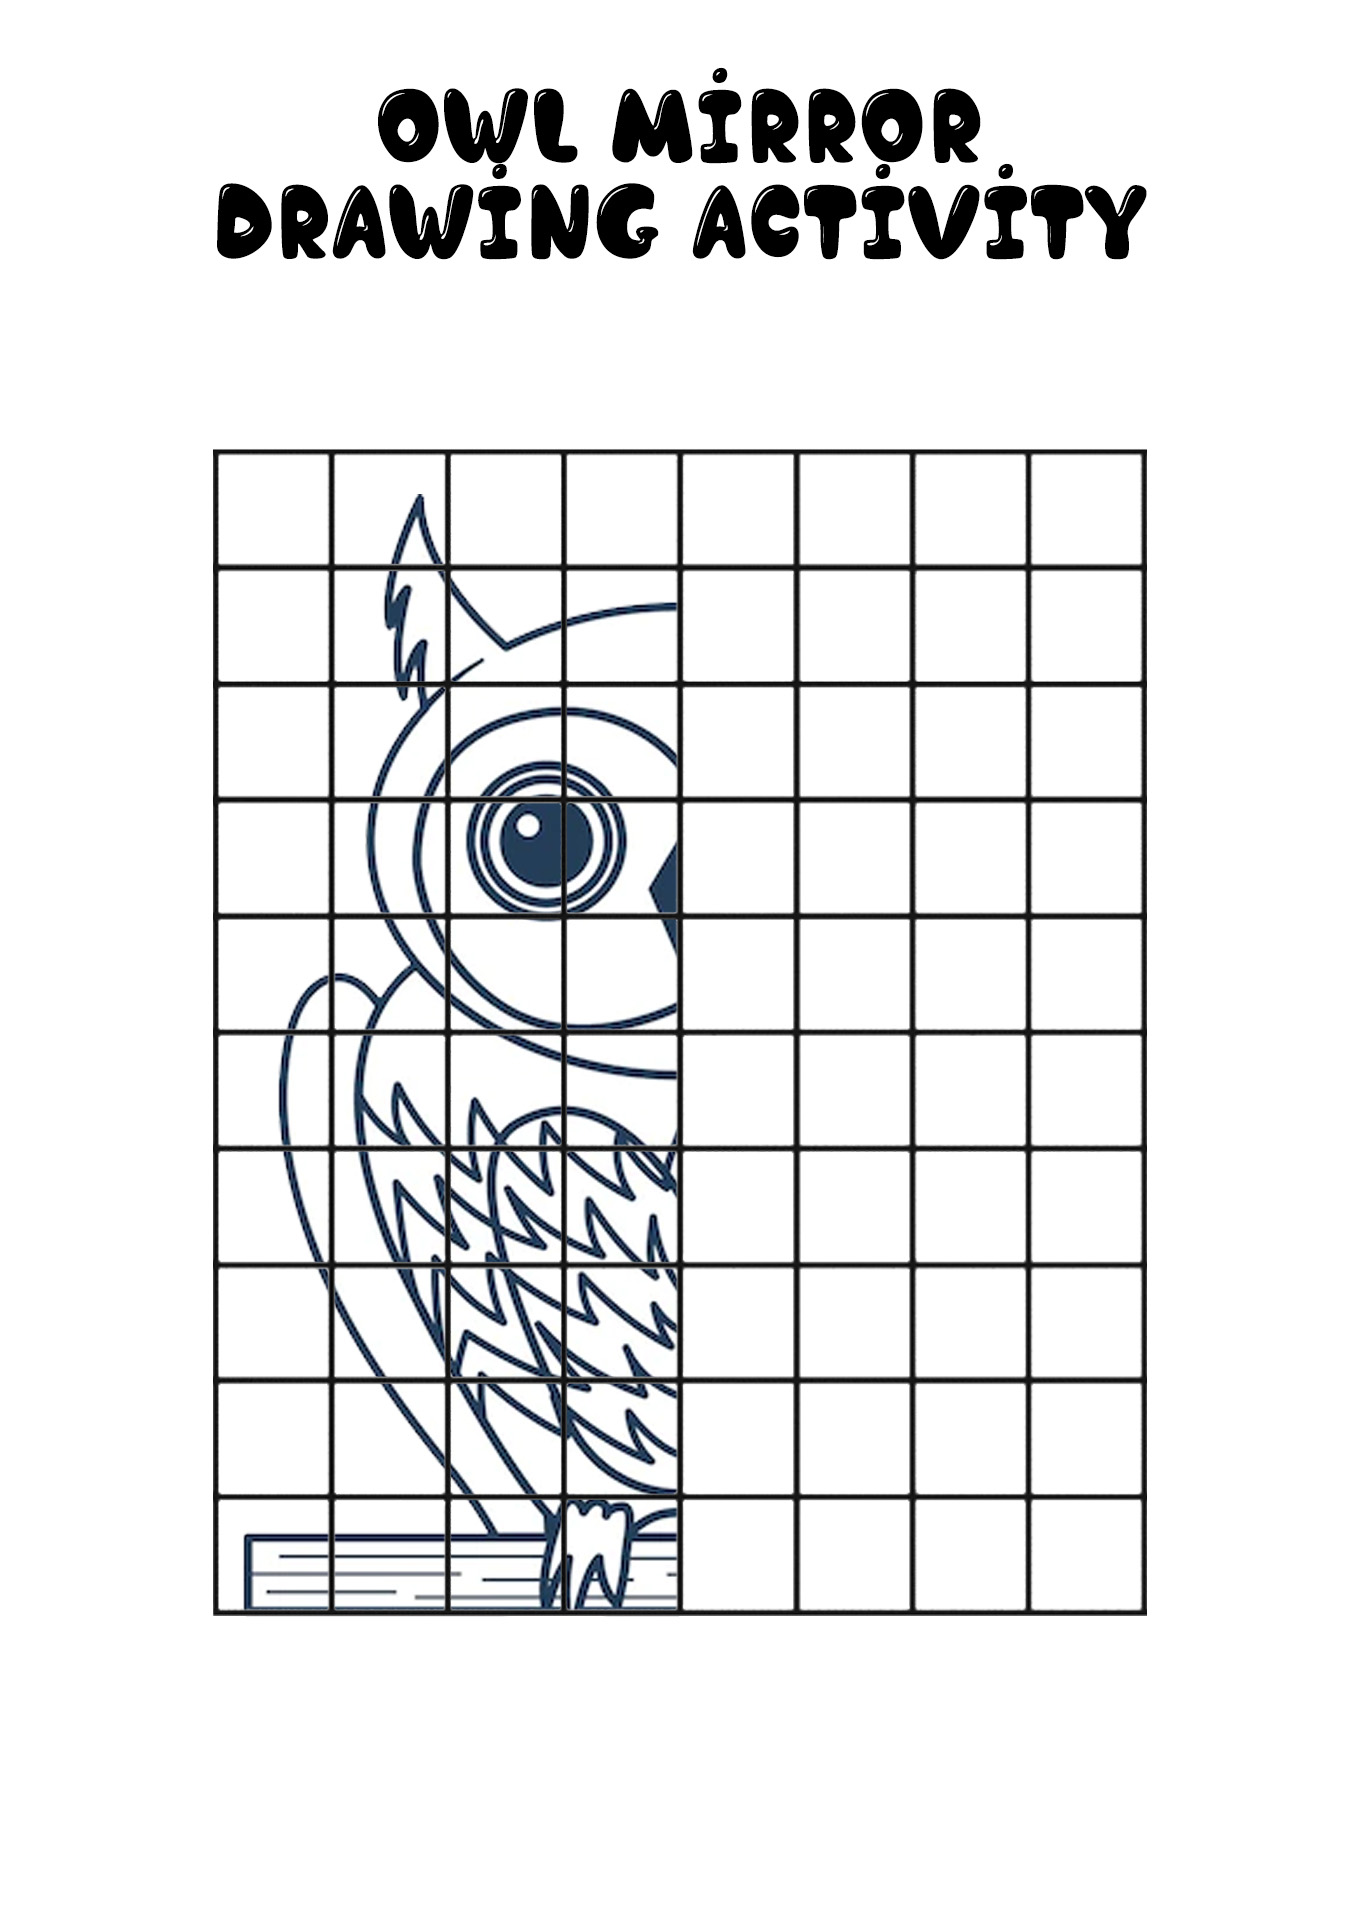 Owl Mirror Drawing Activity Image